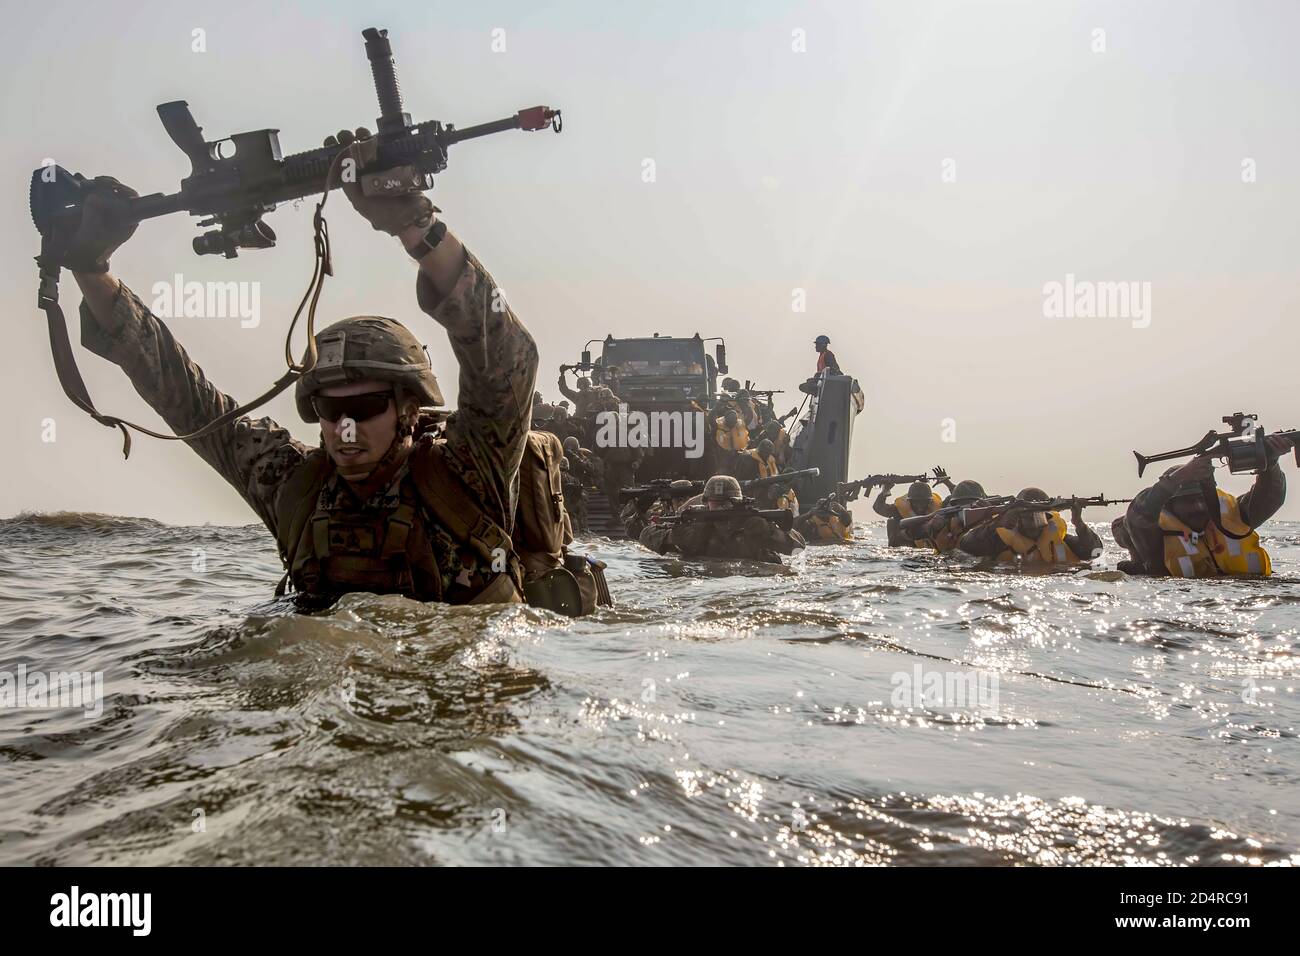 191119-M-ZF985-0070KAKINADA BEACH, India (Nov. 19, 2019) U.S. Marines currently under 4th Marine Regiment, 3rd Marine Division, and members of the Indian military wade to shore during exercise Tiger TRIUMPH on Kakinada Beach, India, Nov. 19, 2019. During Tiger TRIUMPH, U.S. and Indian forces conducted valuable training in humanitarian assistance disaster relief operations by inserting a joint and combined Indian and U.S. force from ship-to-shore in response to a hypothetical natural disaster. While on shore, the forces conducted limited patrolling, moved simulated victims to medical care and p Stock Photo